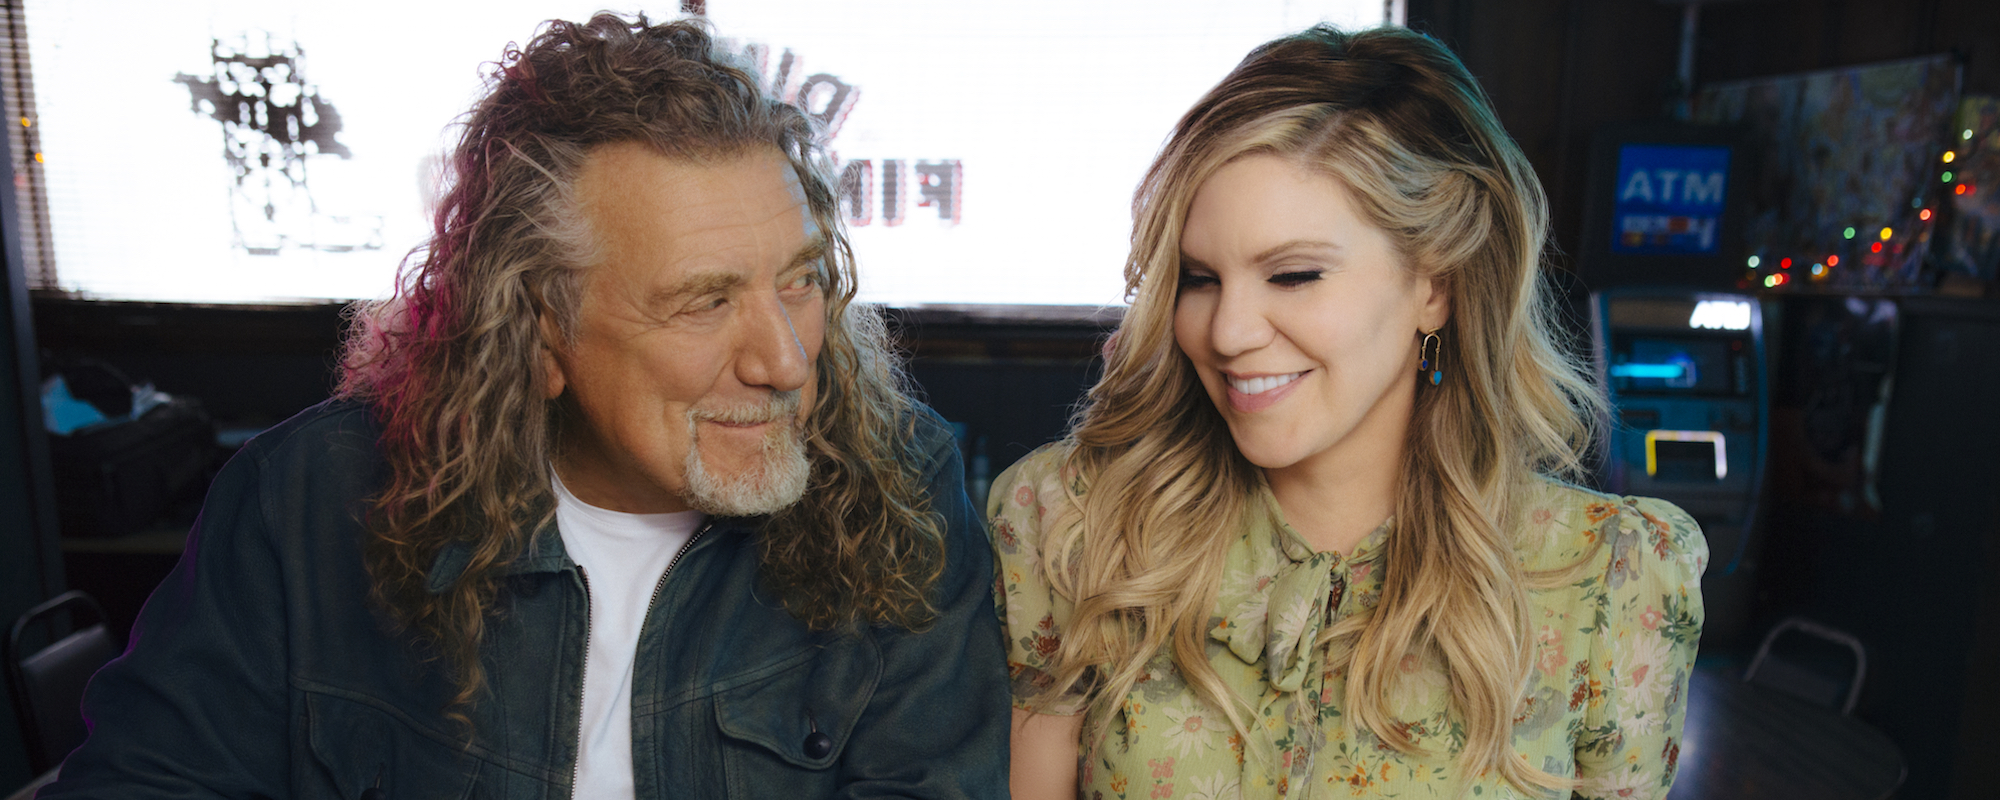 Robert Plant, Alison Krauss Share New Lyric Video for “Can’t Let Go”